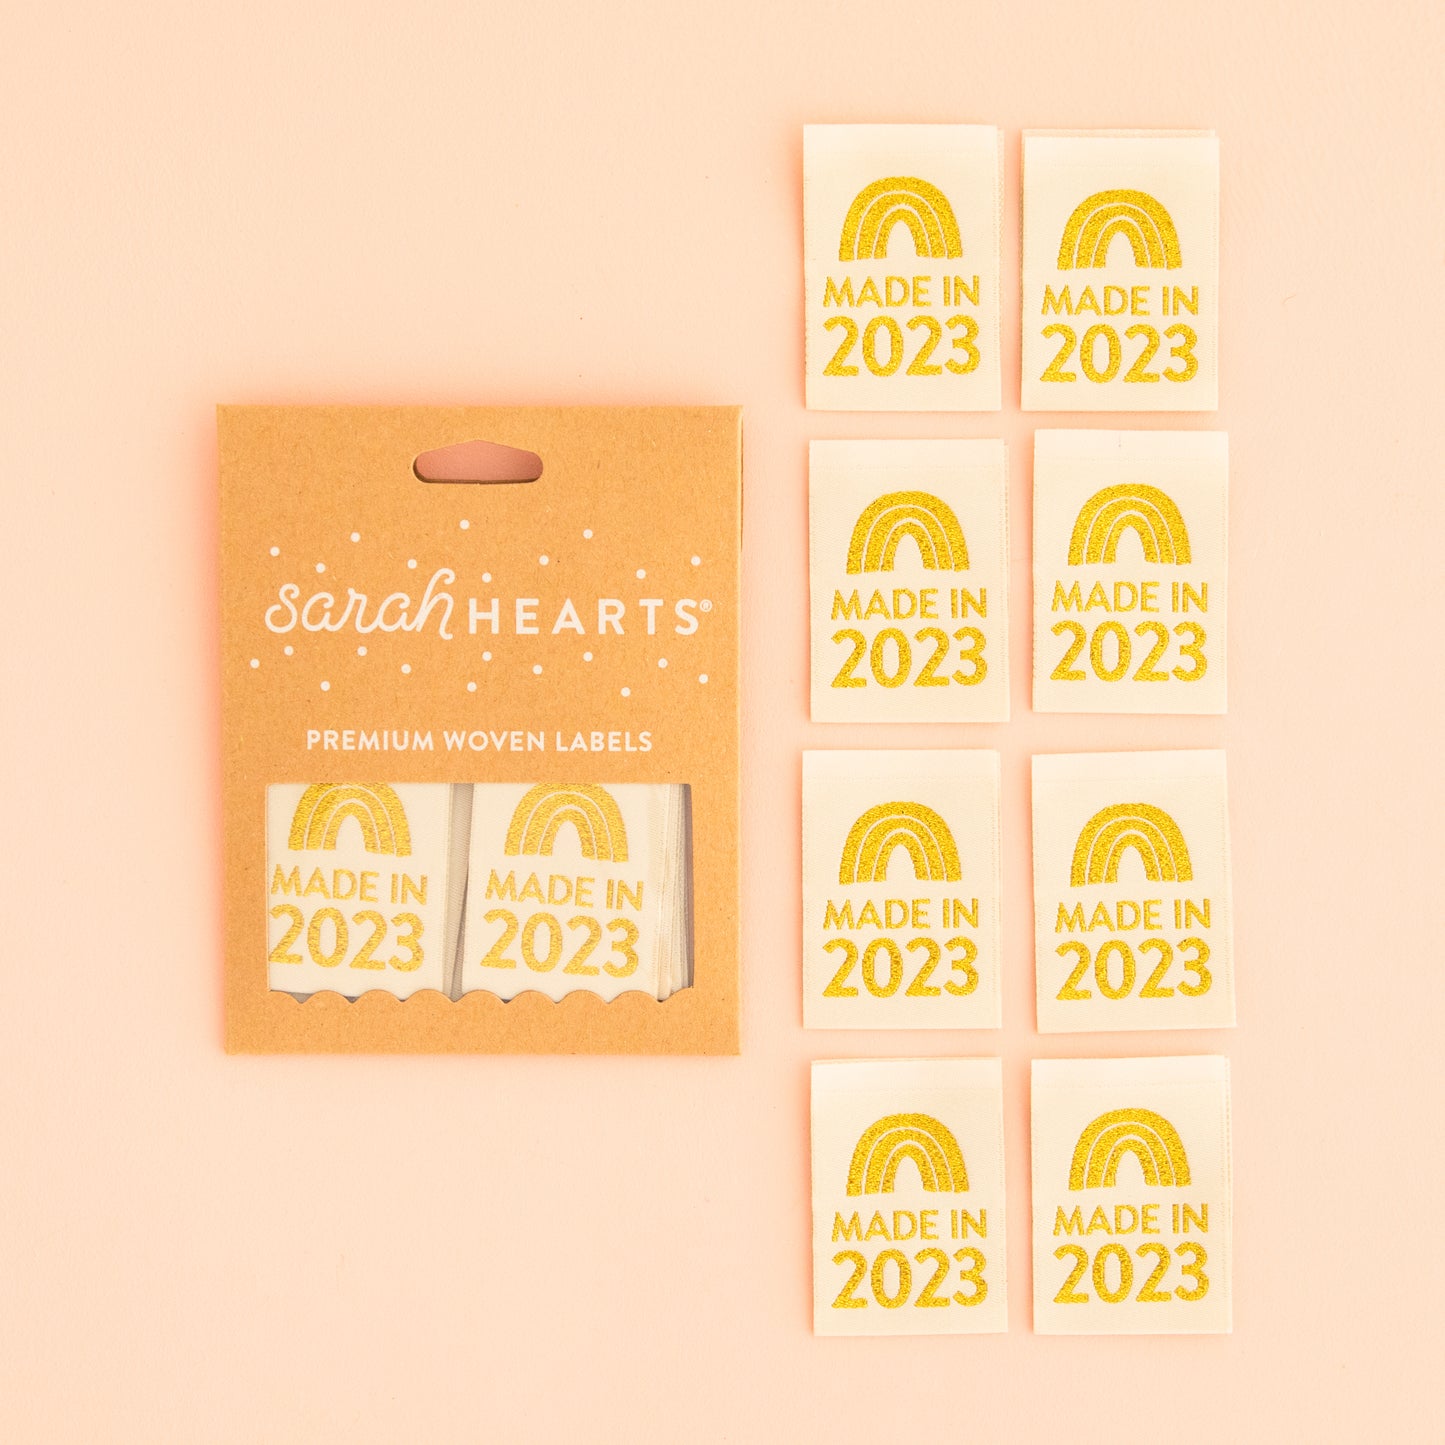 Made in 2023 Metallic Gold Woven Labels